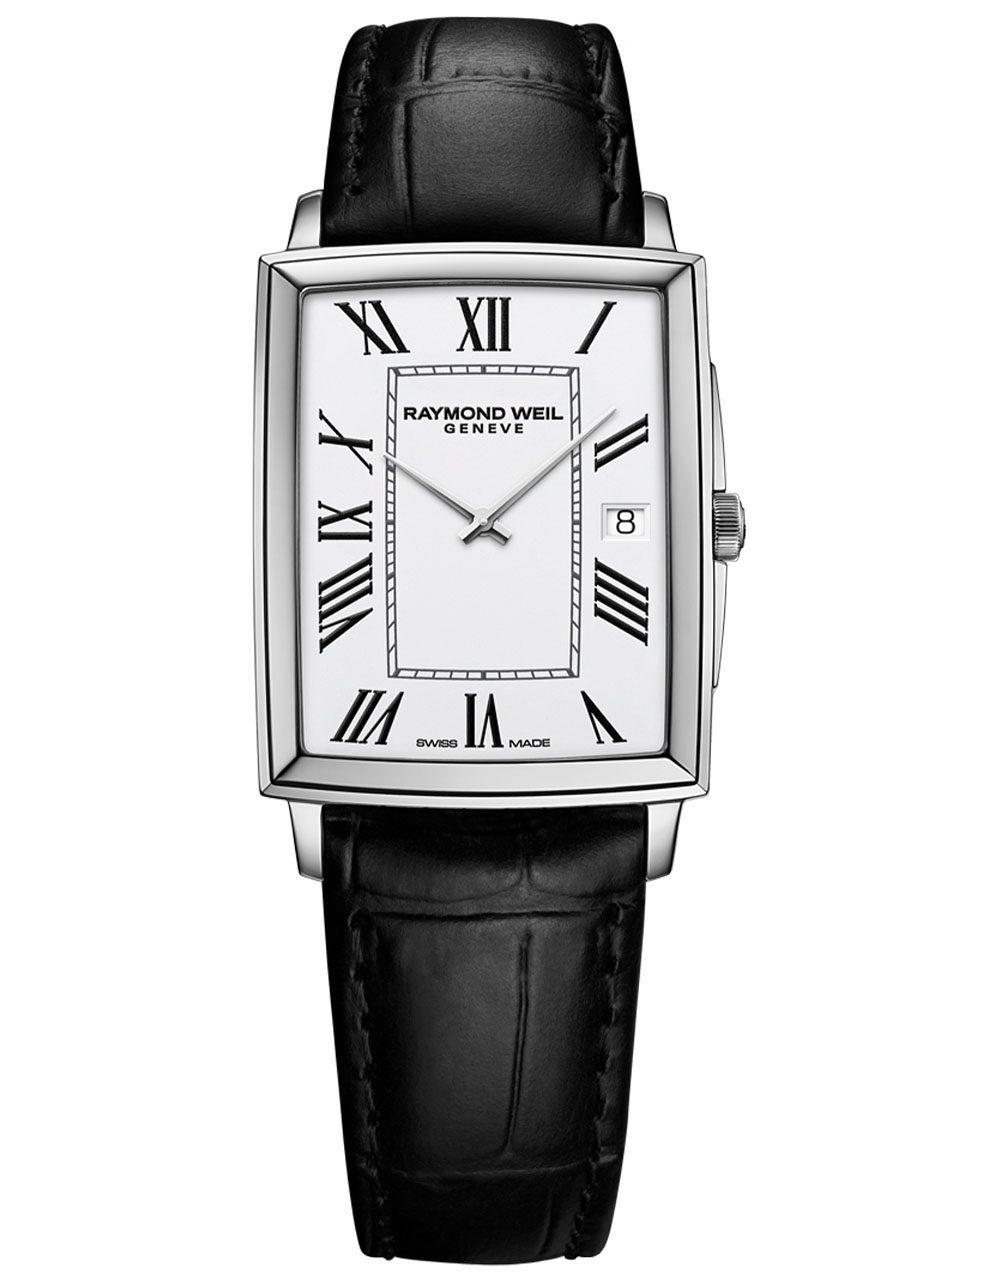 Toccata Men's Classic Rectangular Stainless Steel Leather Watch, 37 x 29 mm  - Store US - Raymond Weil